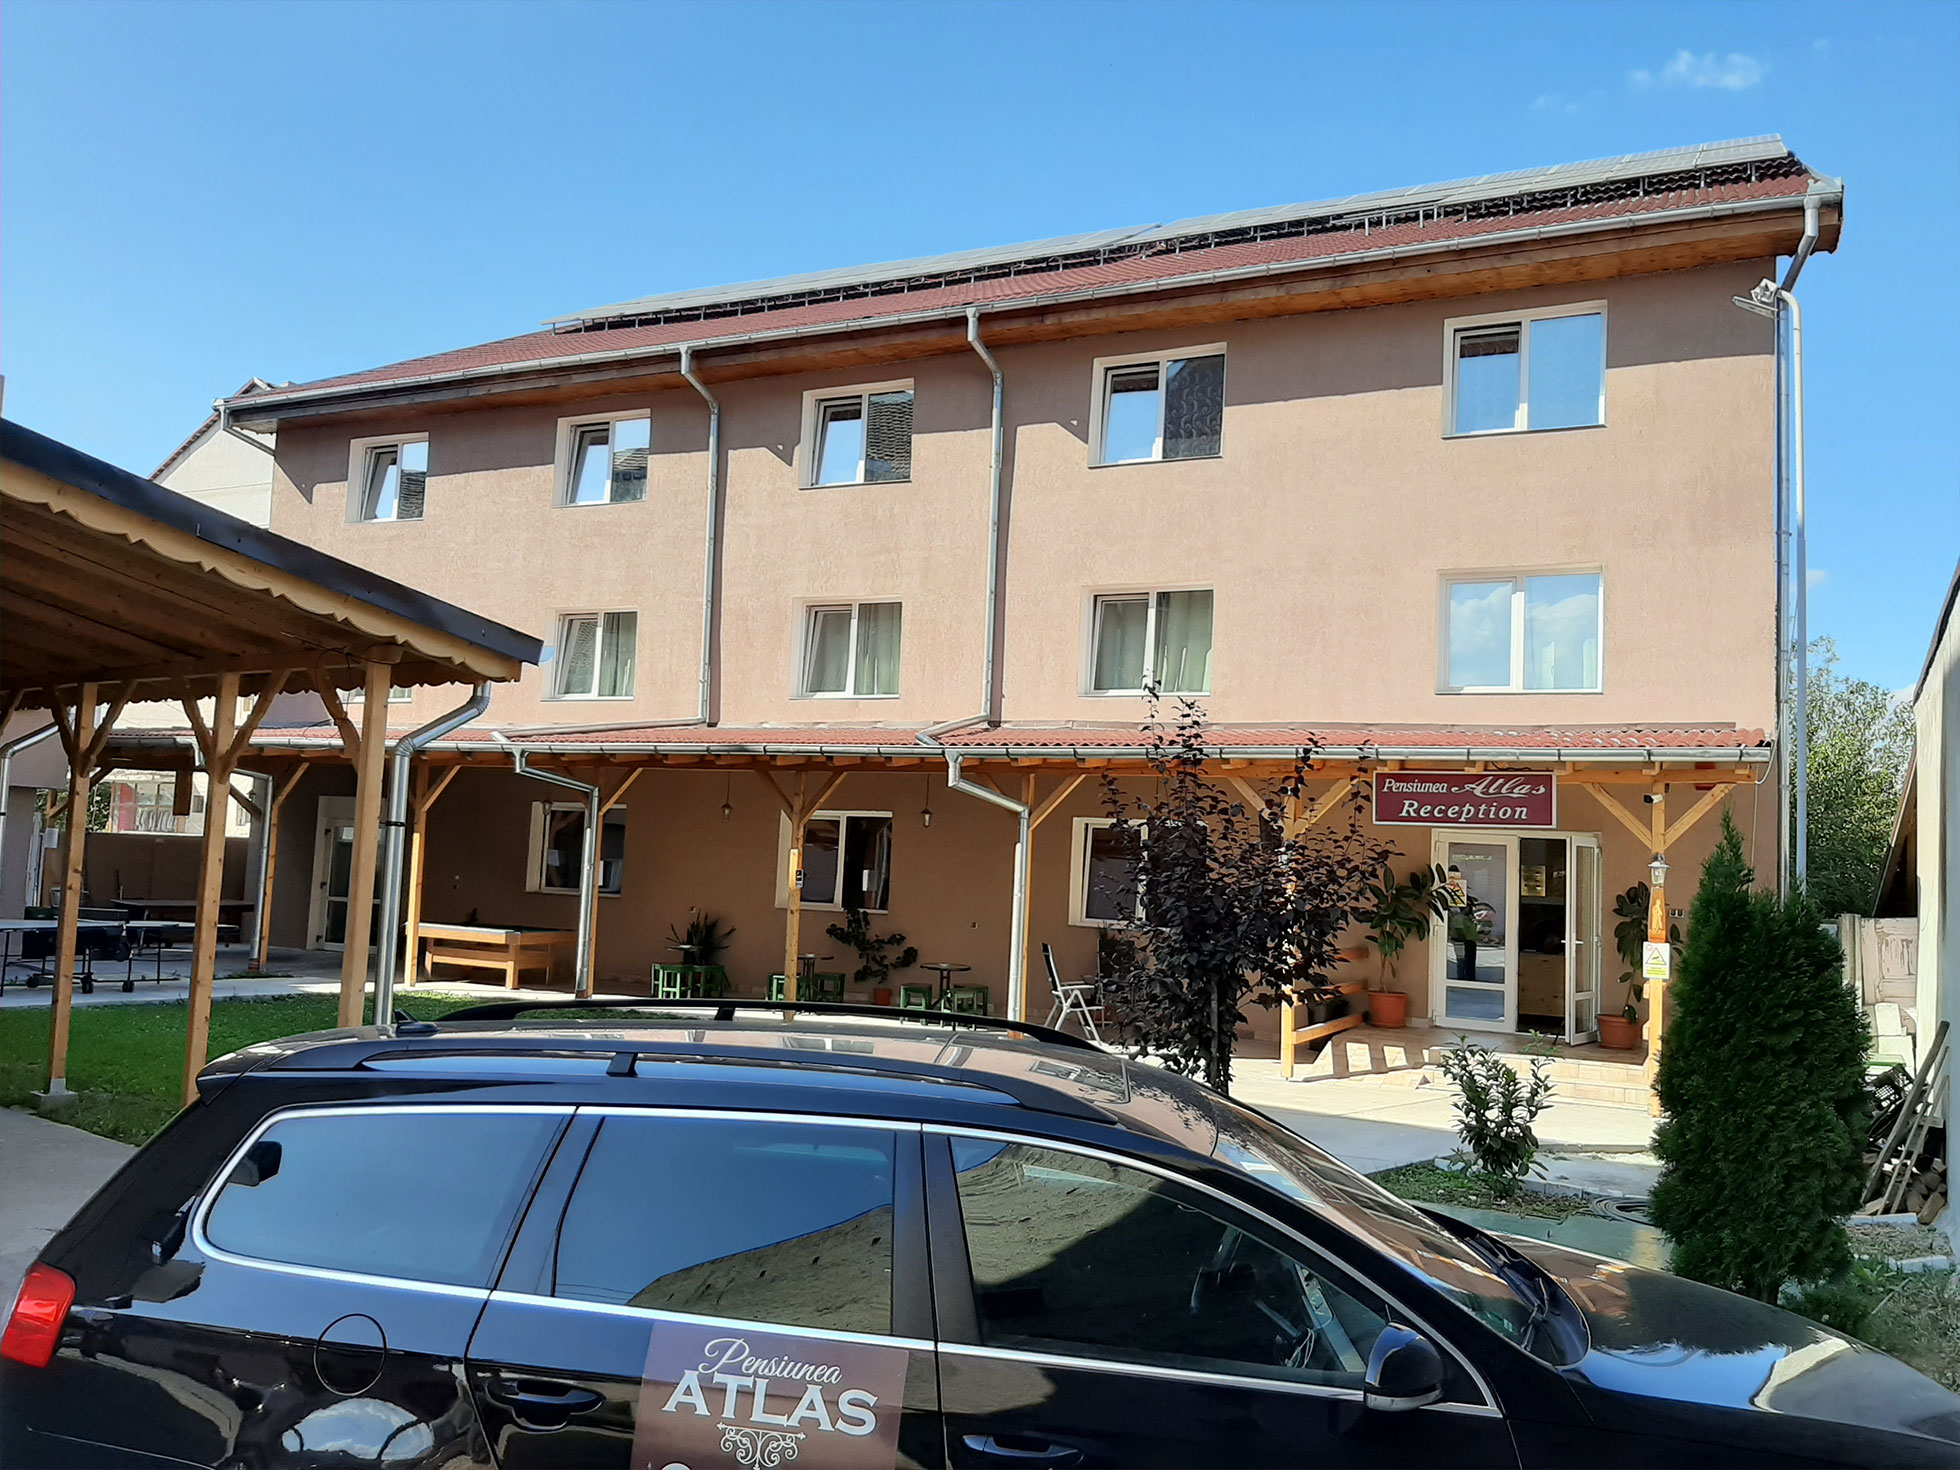 Pension Atlas Ilia - the second building, face to face with the first